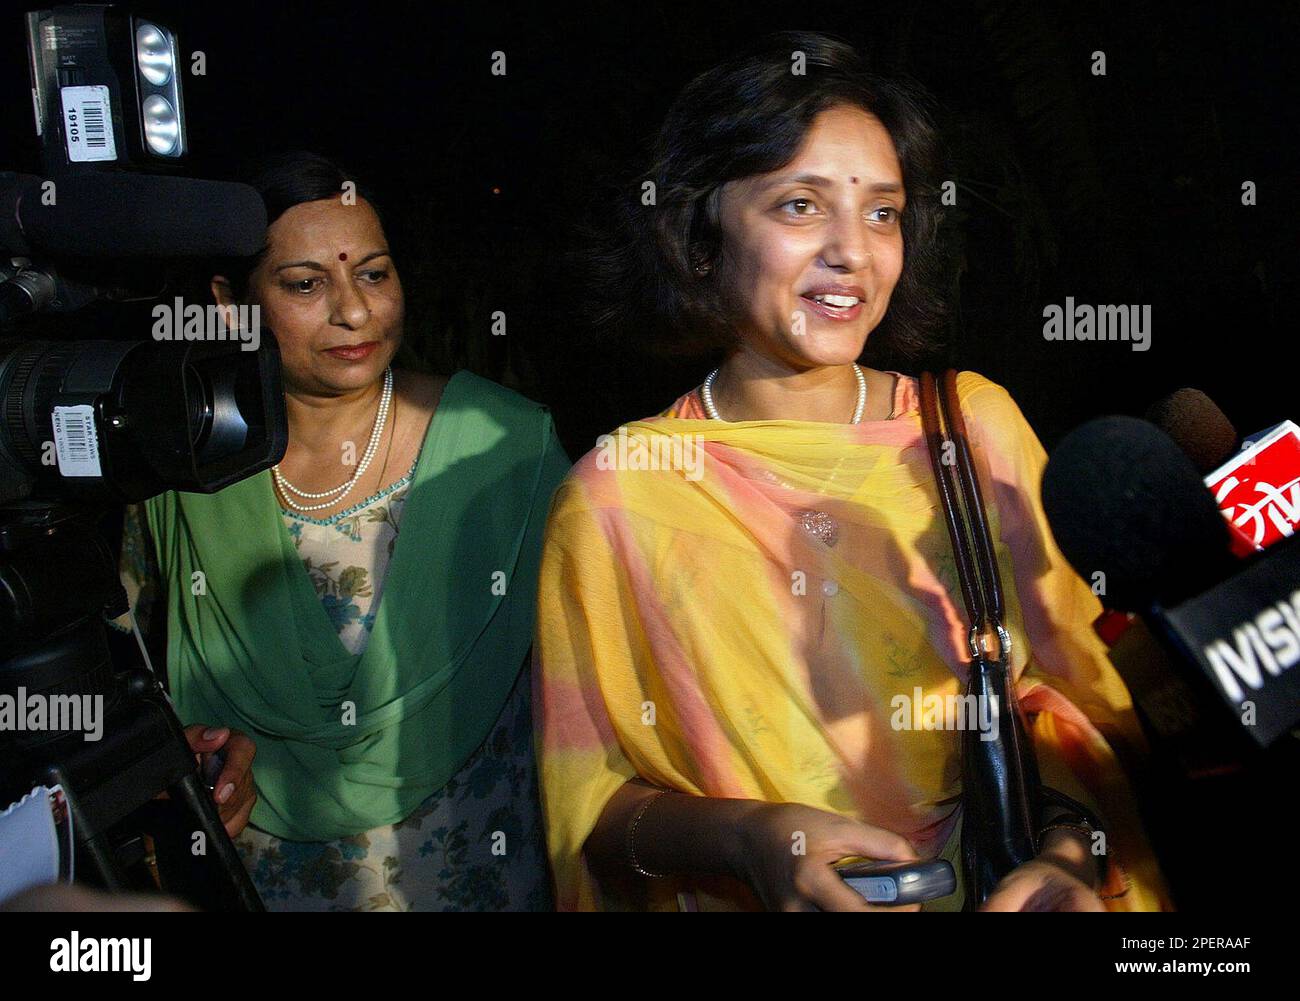 Gayatri Rathore, right, wife of Athens Olympics silver medallist Rajyavardhan Singh Rathore speaks to the media as mother Manju Rathore, left, looks on at Rajyavardhan Singh Rathores residence in New Delhi, India, Tuesday, Aug. 17, 2004. India exulted Tuesday after shooter Rajyavardhan Singh Rathore won the first individual Olympics silver medal, a rare feat in this billion strong nation where athletes complain that nothing apart from cricket, the national passion, gets attention. (AP Photo/Gurinder Osan) Stock Photo